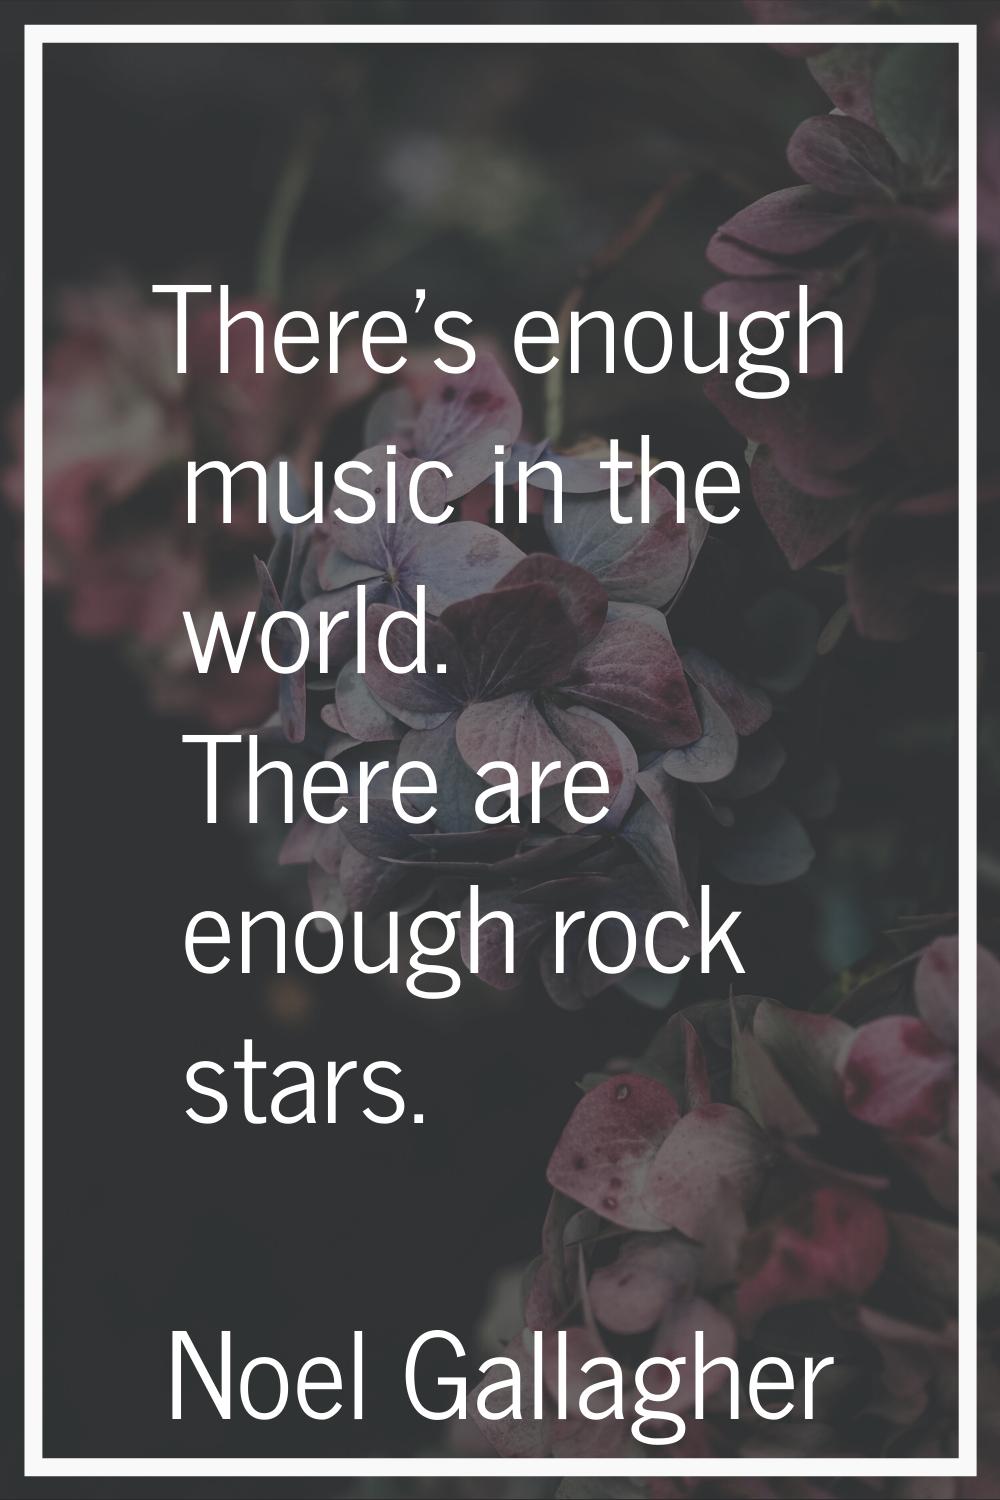 There's enough music in the world. There are enough rock stars.